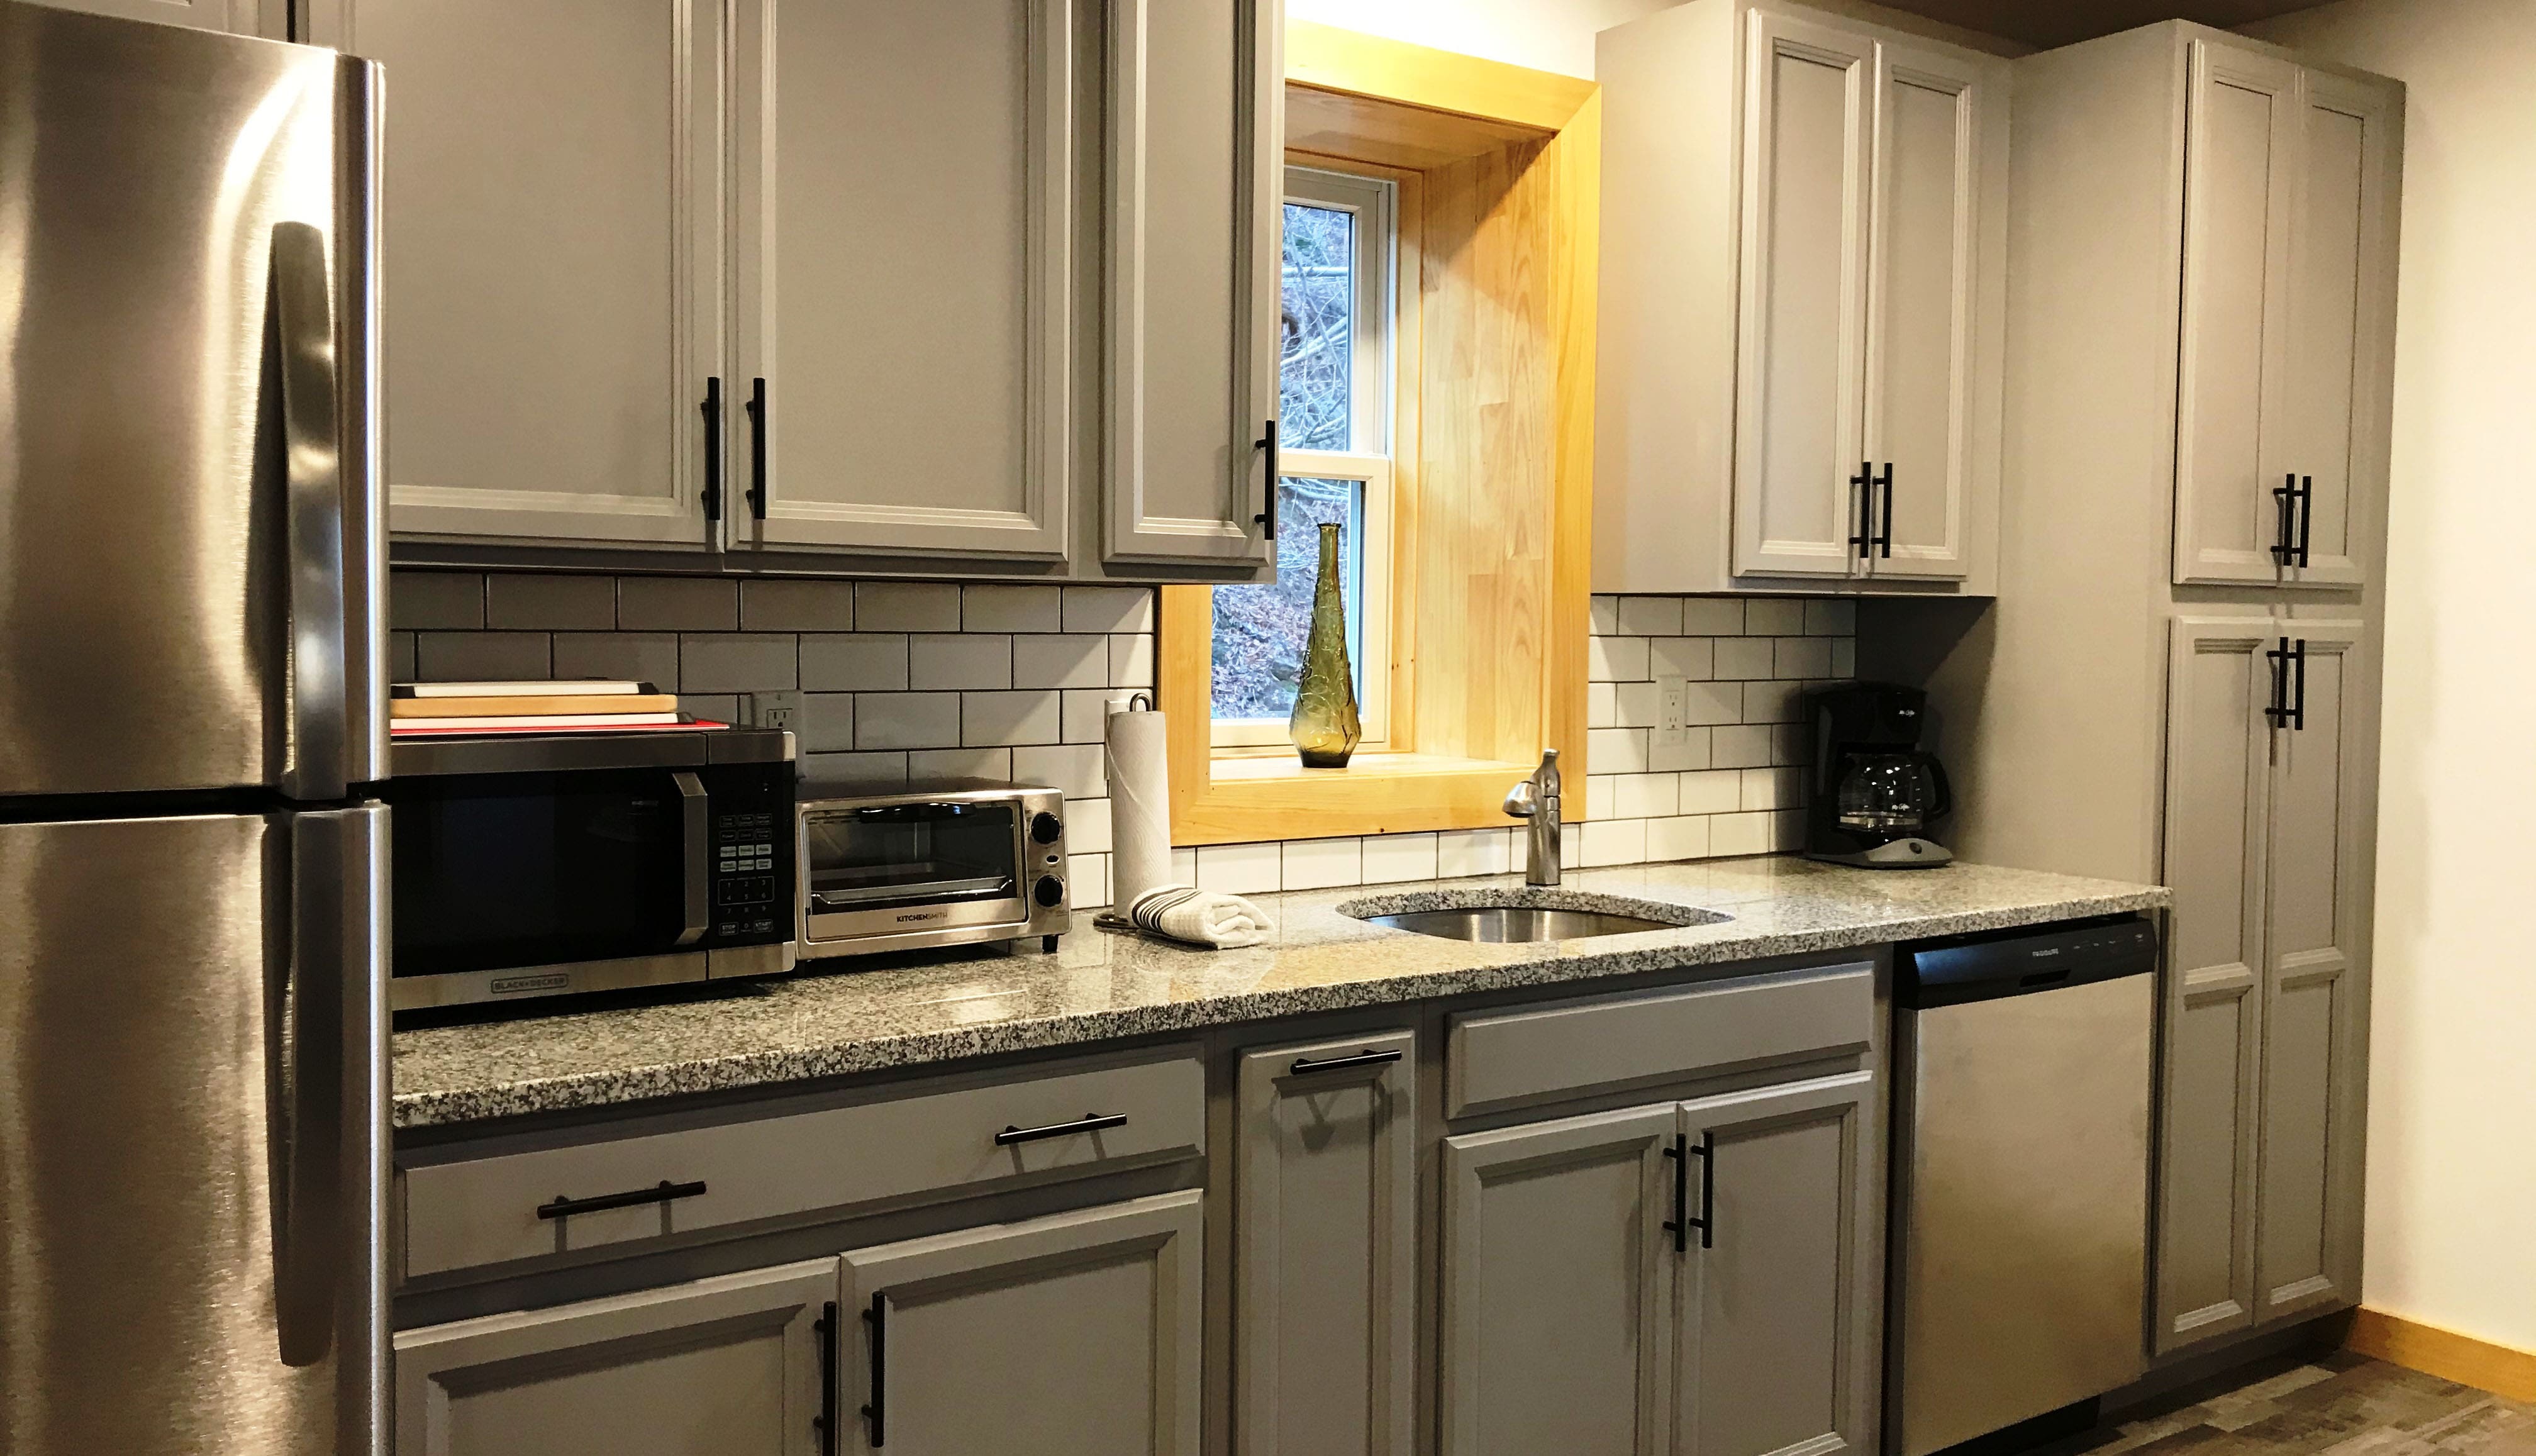 All new and fully equipped kitchen!